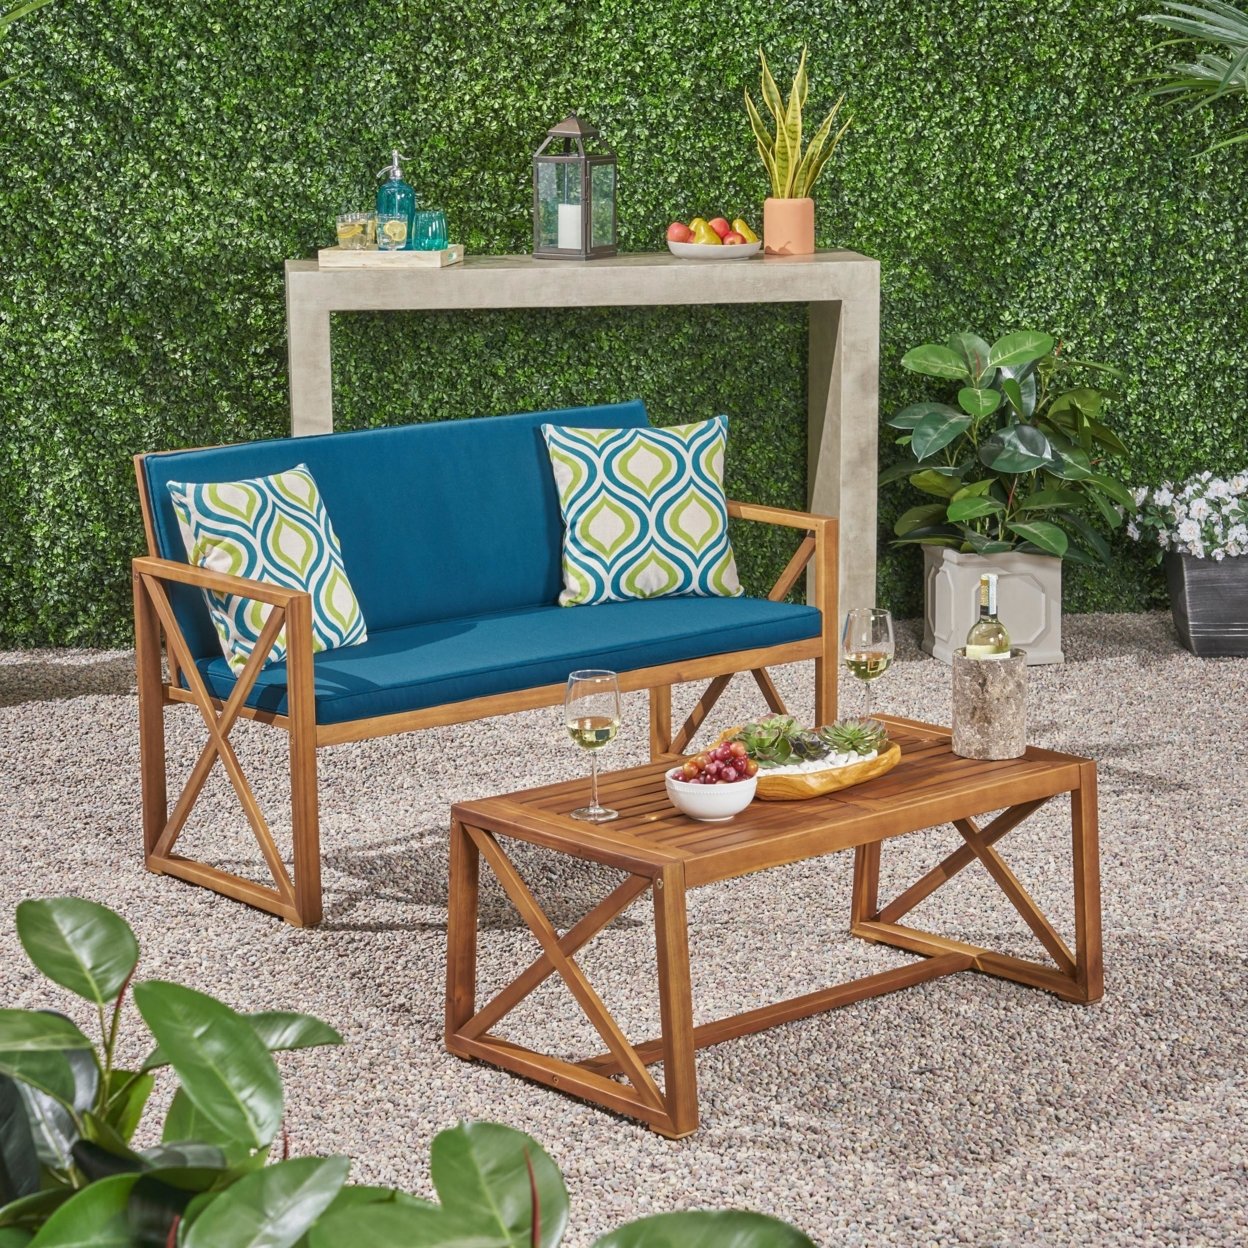 Hazel Outdoor Acacia Wood Loveseat With Coffee Table Set With Cushions - Brown Patina / Dark Teal